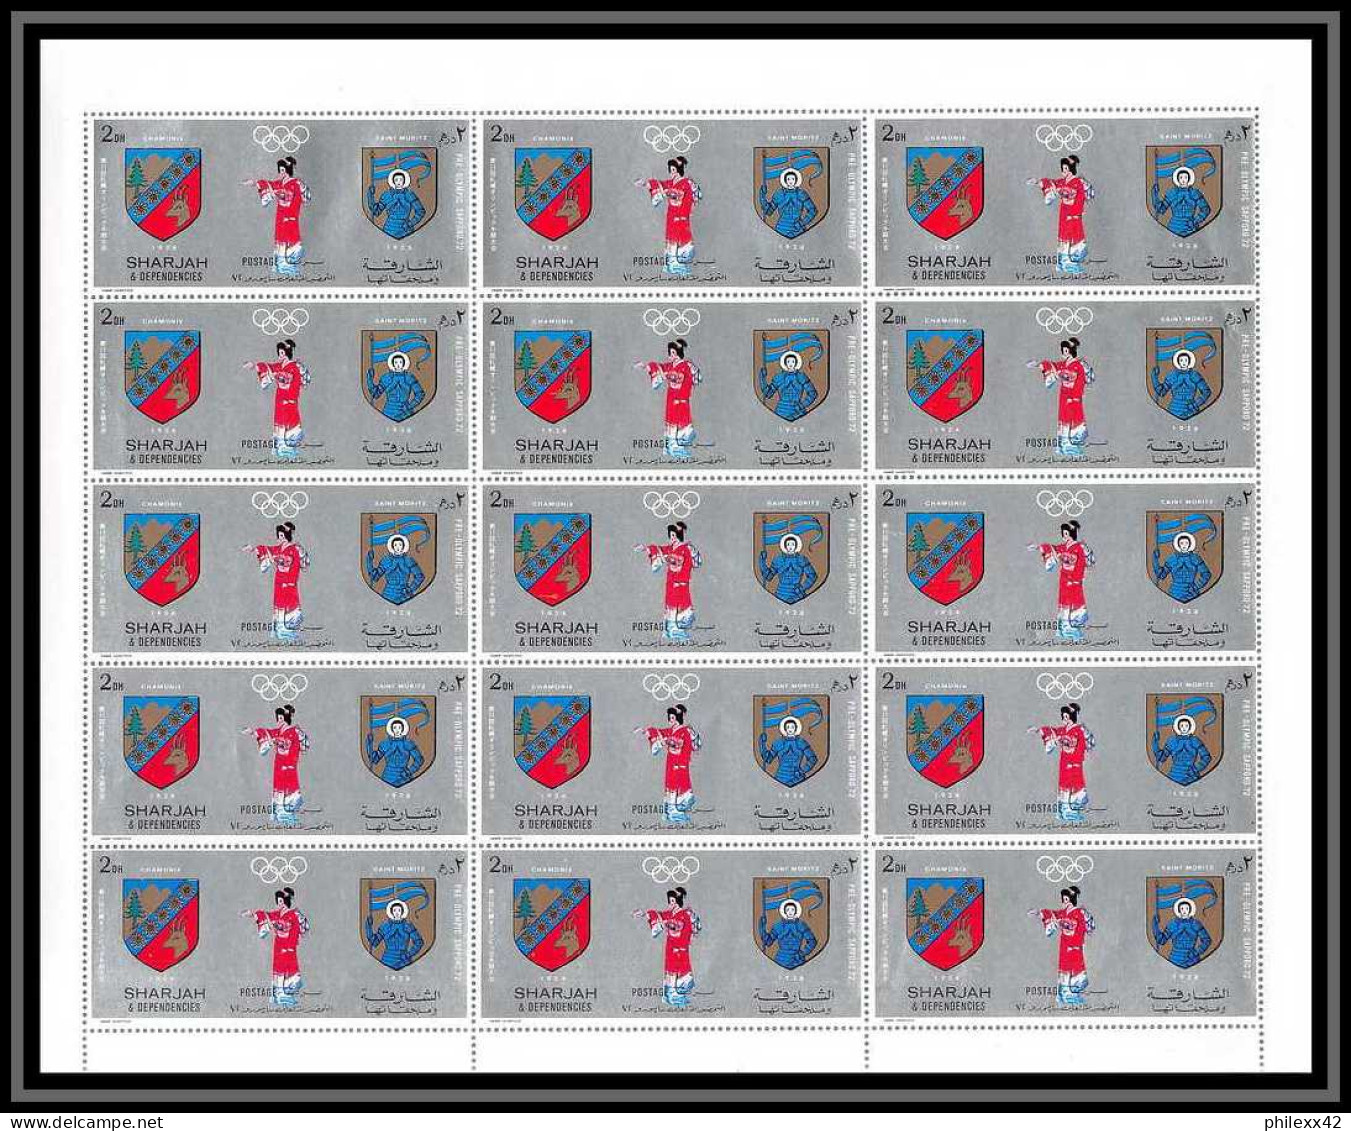 101c Sharjah MNH ** Mi N° 825 / 834 A Jeux Olympiques (winter Olympic Games) Sapporo 72 Feuilles (sheets) - Sharjah